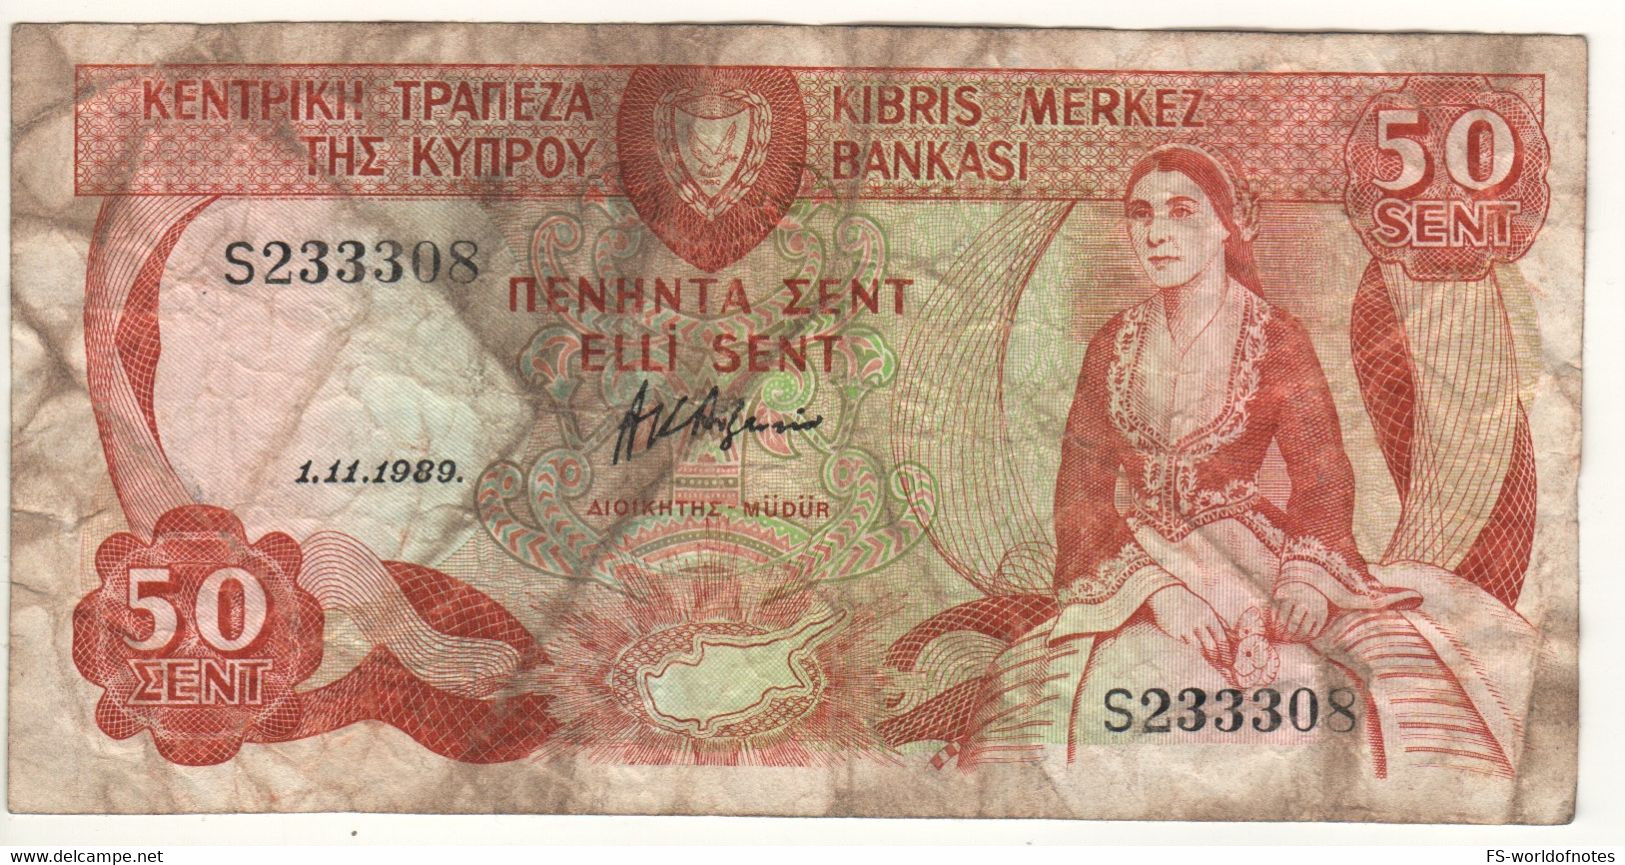 CYPRUS   50 Cents      P52      1.11.1989   ( Woman In Local Costum + Yermasoyia Dam At Back ) - Chipre